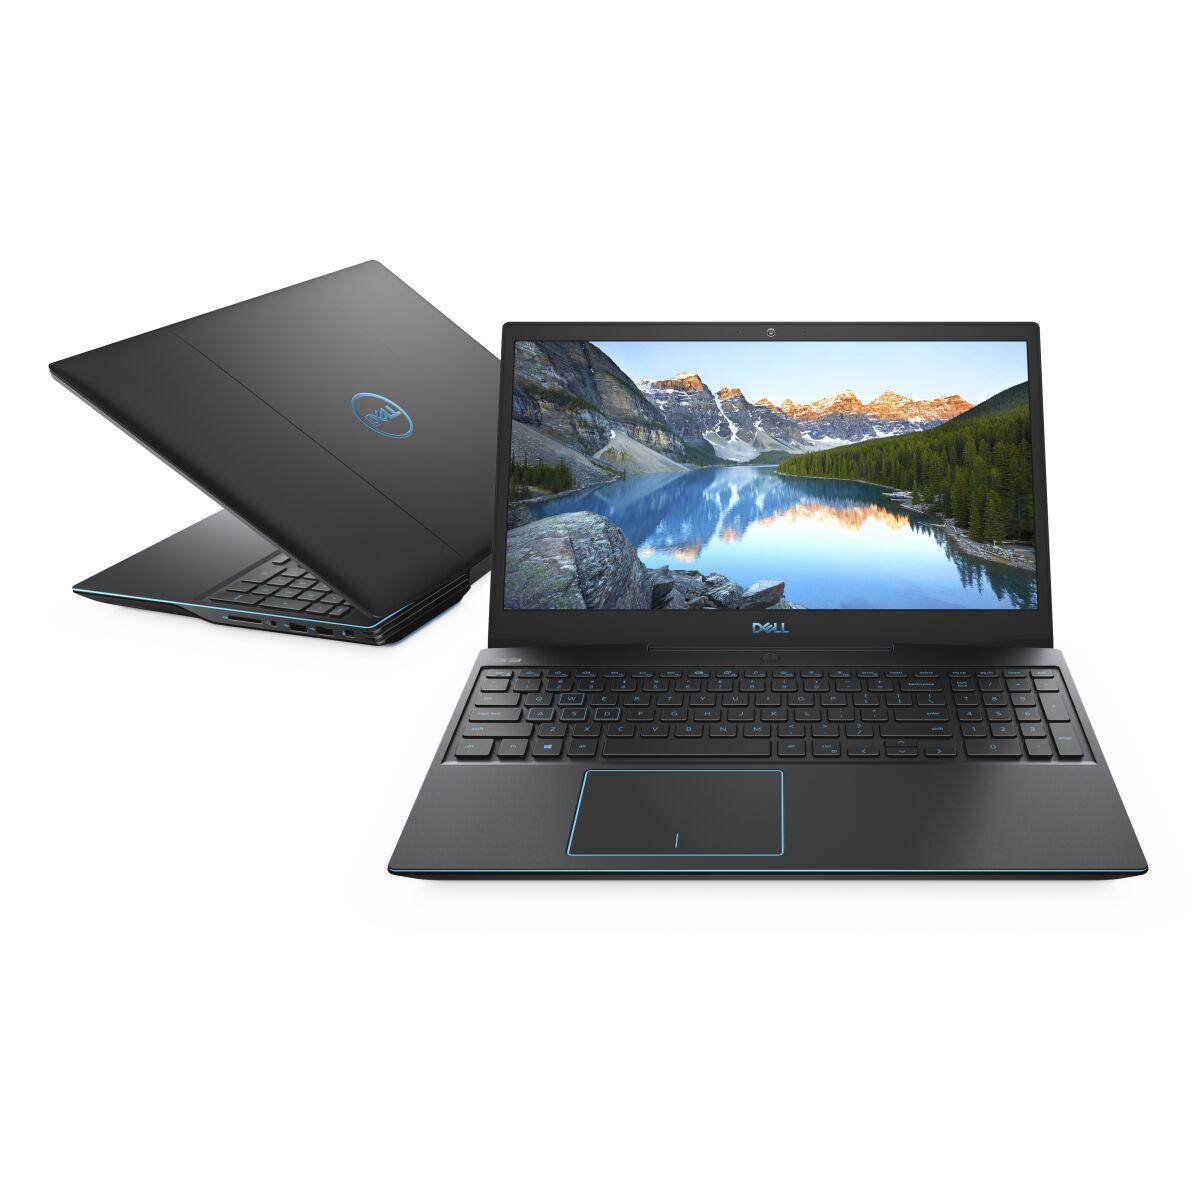 DELL G3 Serie 3500 DIG33500I581NW10H